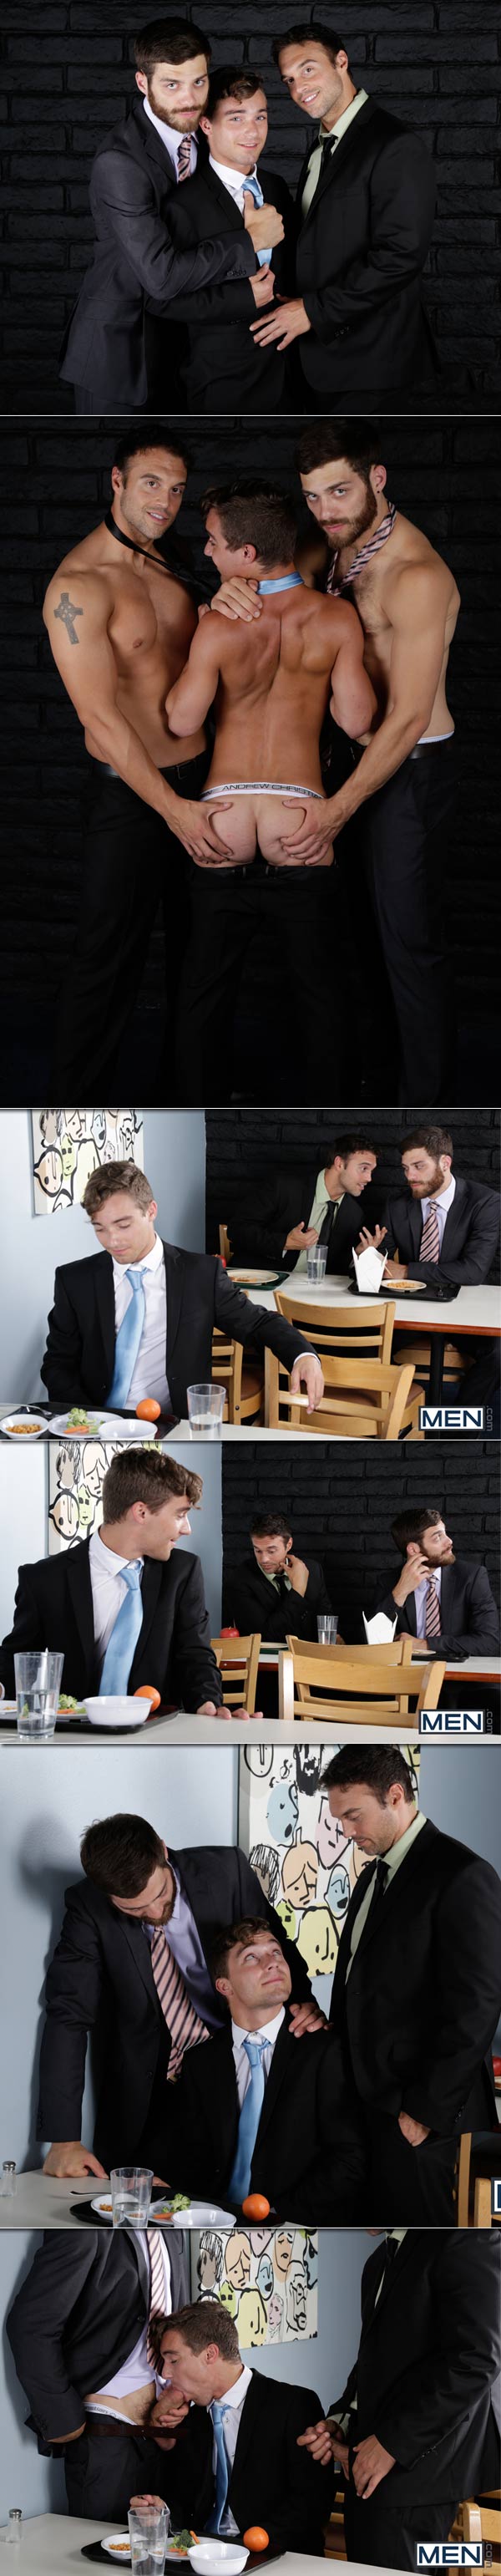 Lunch Time Flirting (Rocco Reed, Tommy Defendi & Tyler Morgan) at The Gay Office